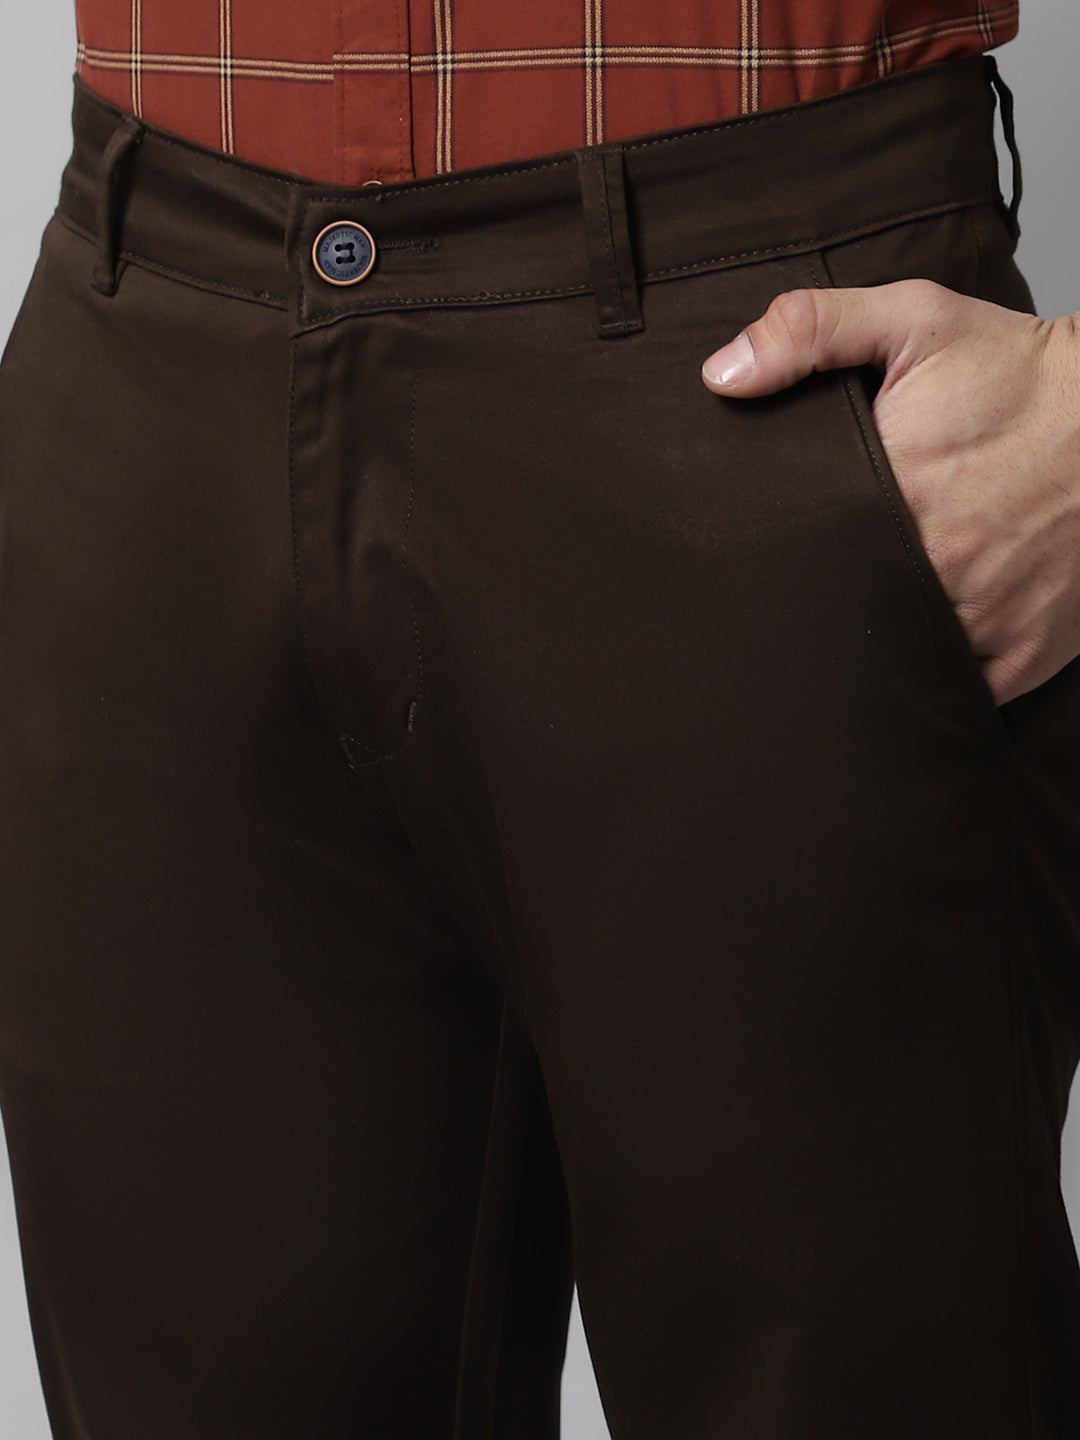 Majestic Man Regular Fit Satin Finish Cotton Casual Solid Chinos Trouser - Brown